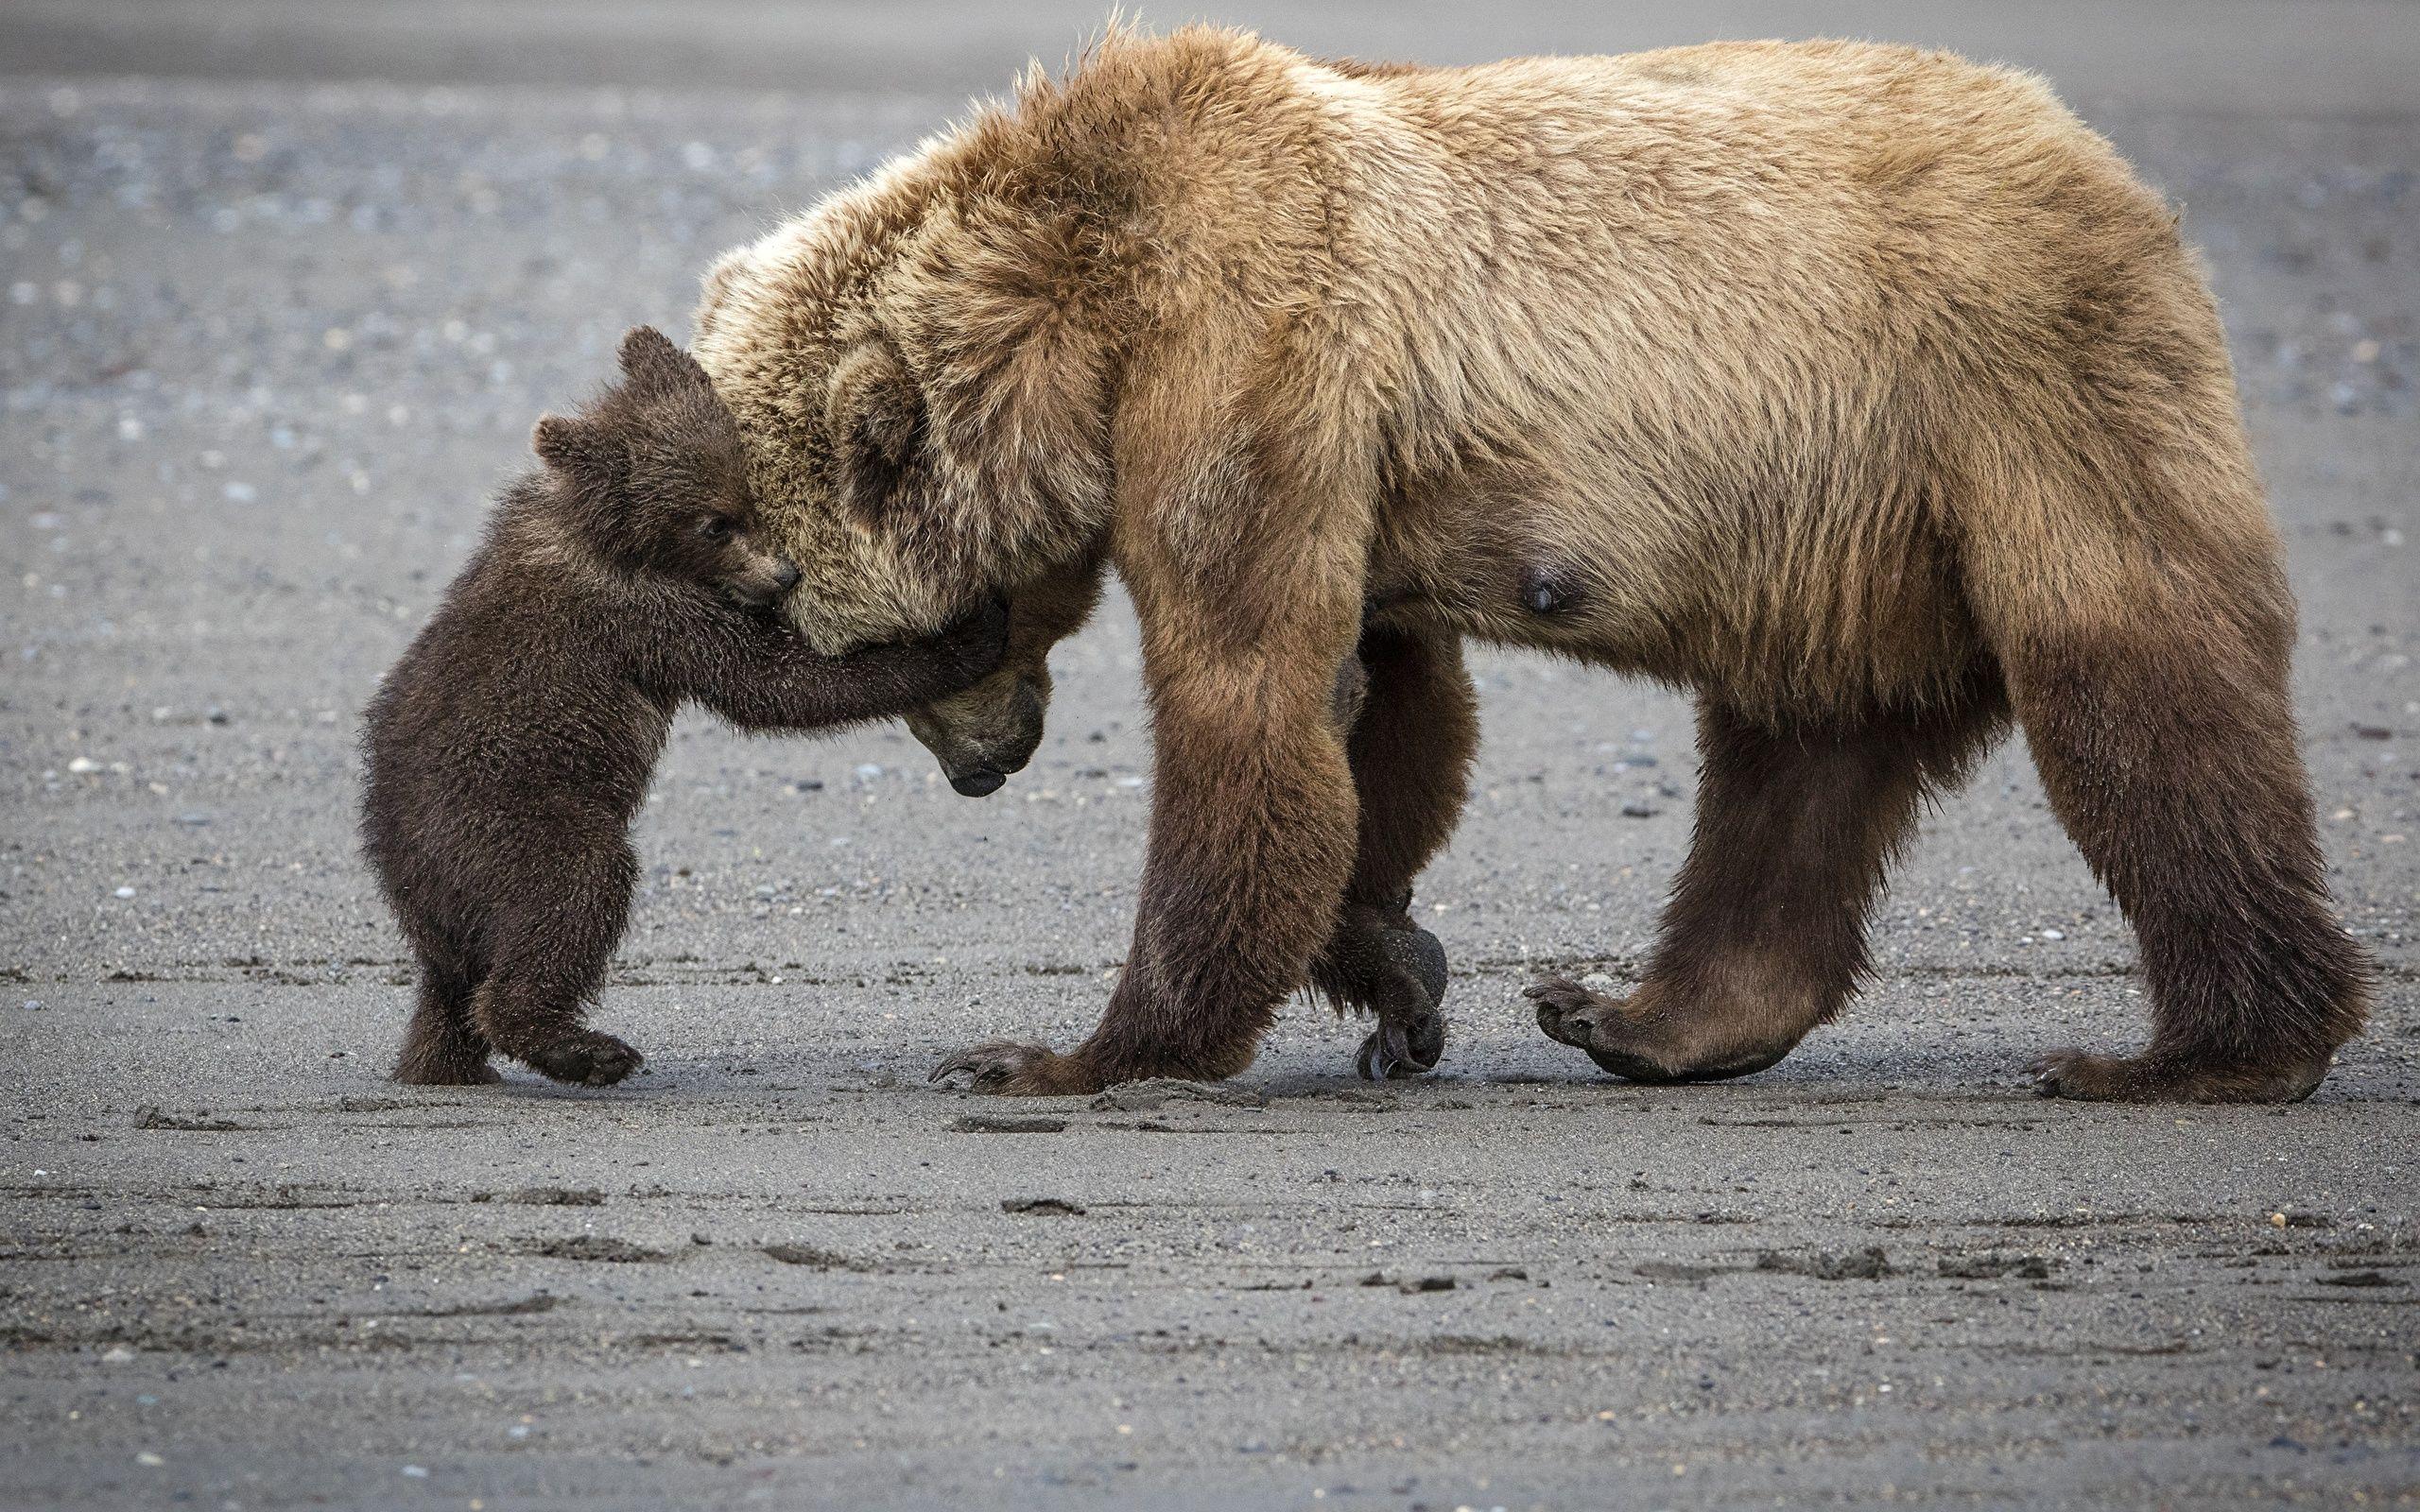 Wallpaper Grizzly Cubs Bears Cute Hug Animals 2560x1600